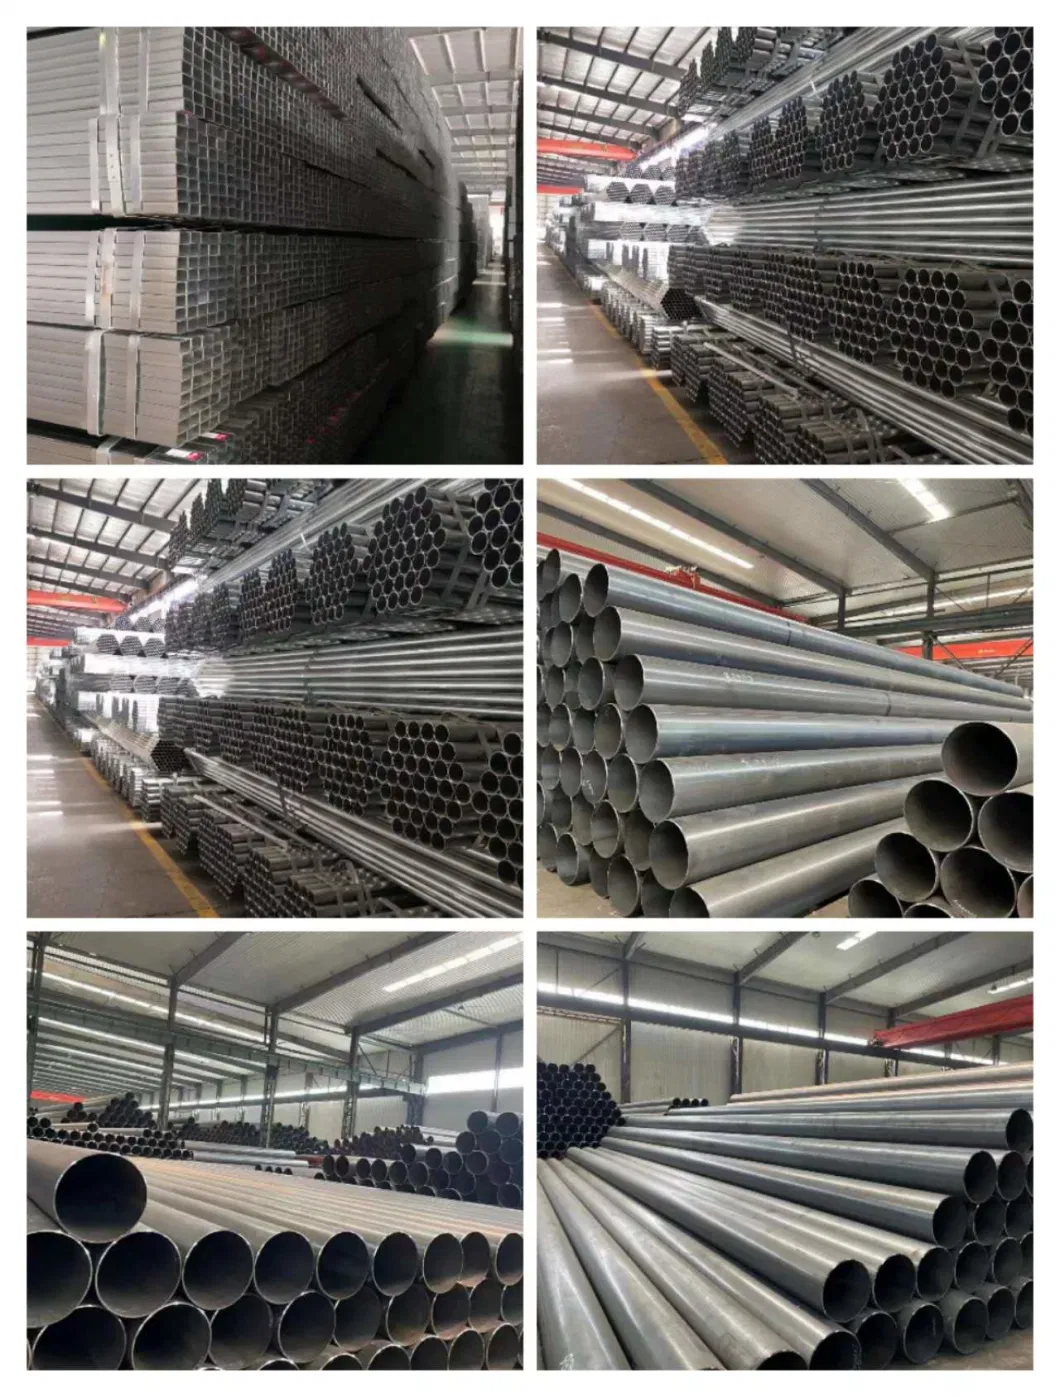 Ms Seamless Pipe Tube Price ASTM A106 Carbon Steel Pipe